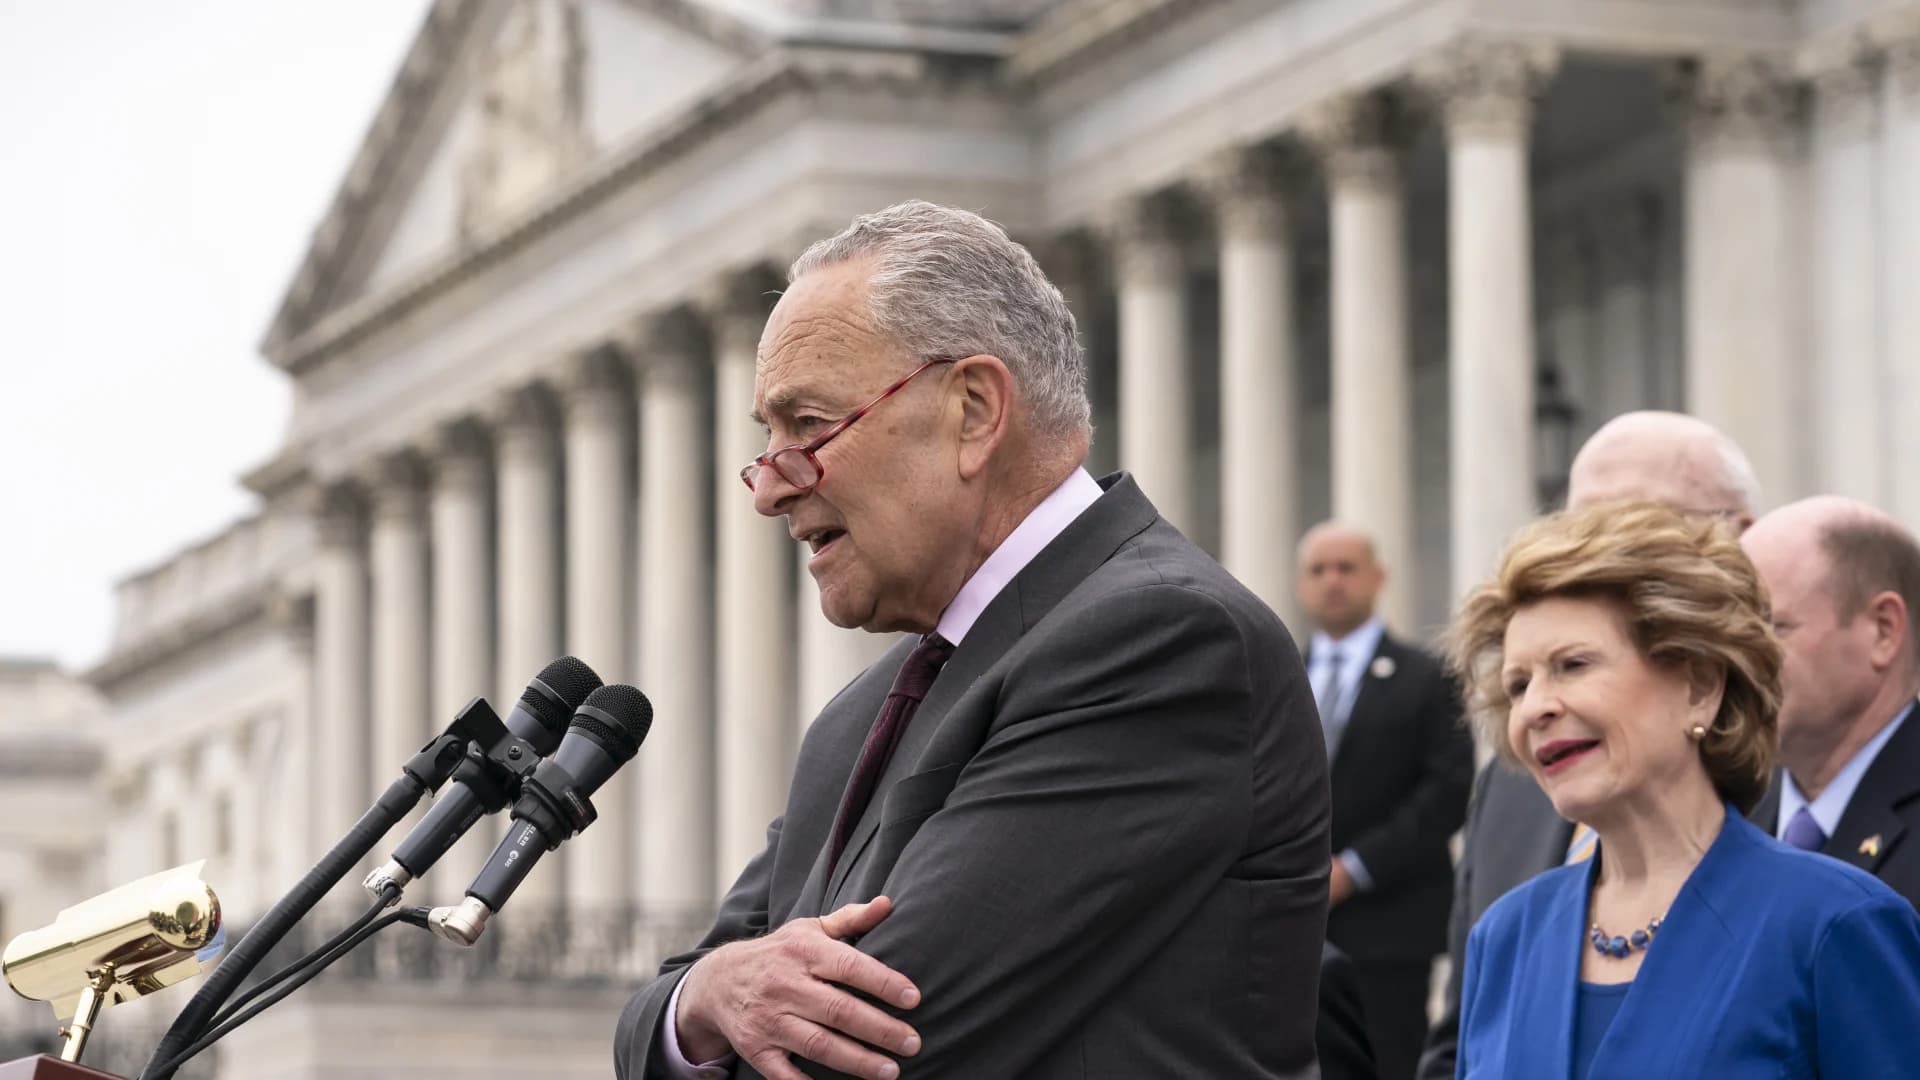 Schumer vows abortion law vote, but not filibuster changes